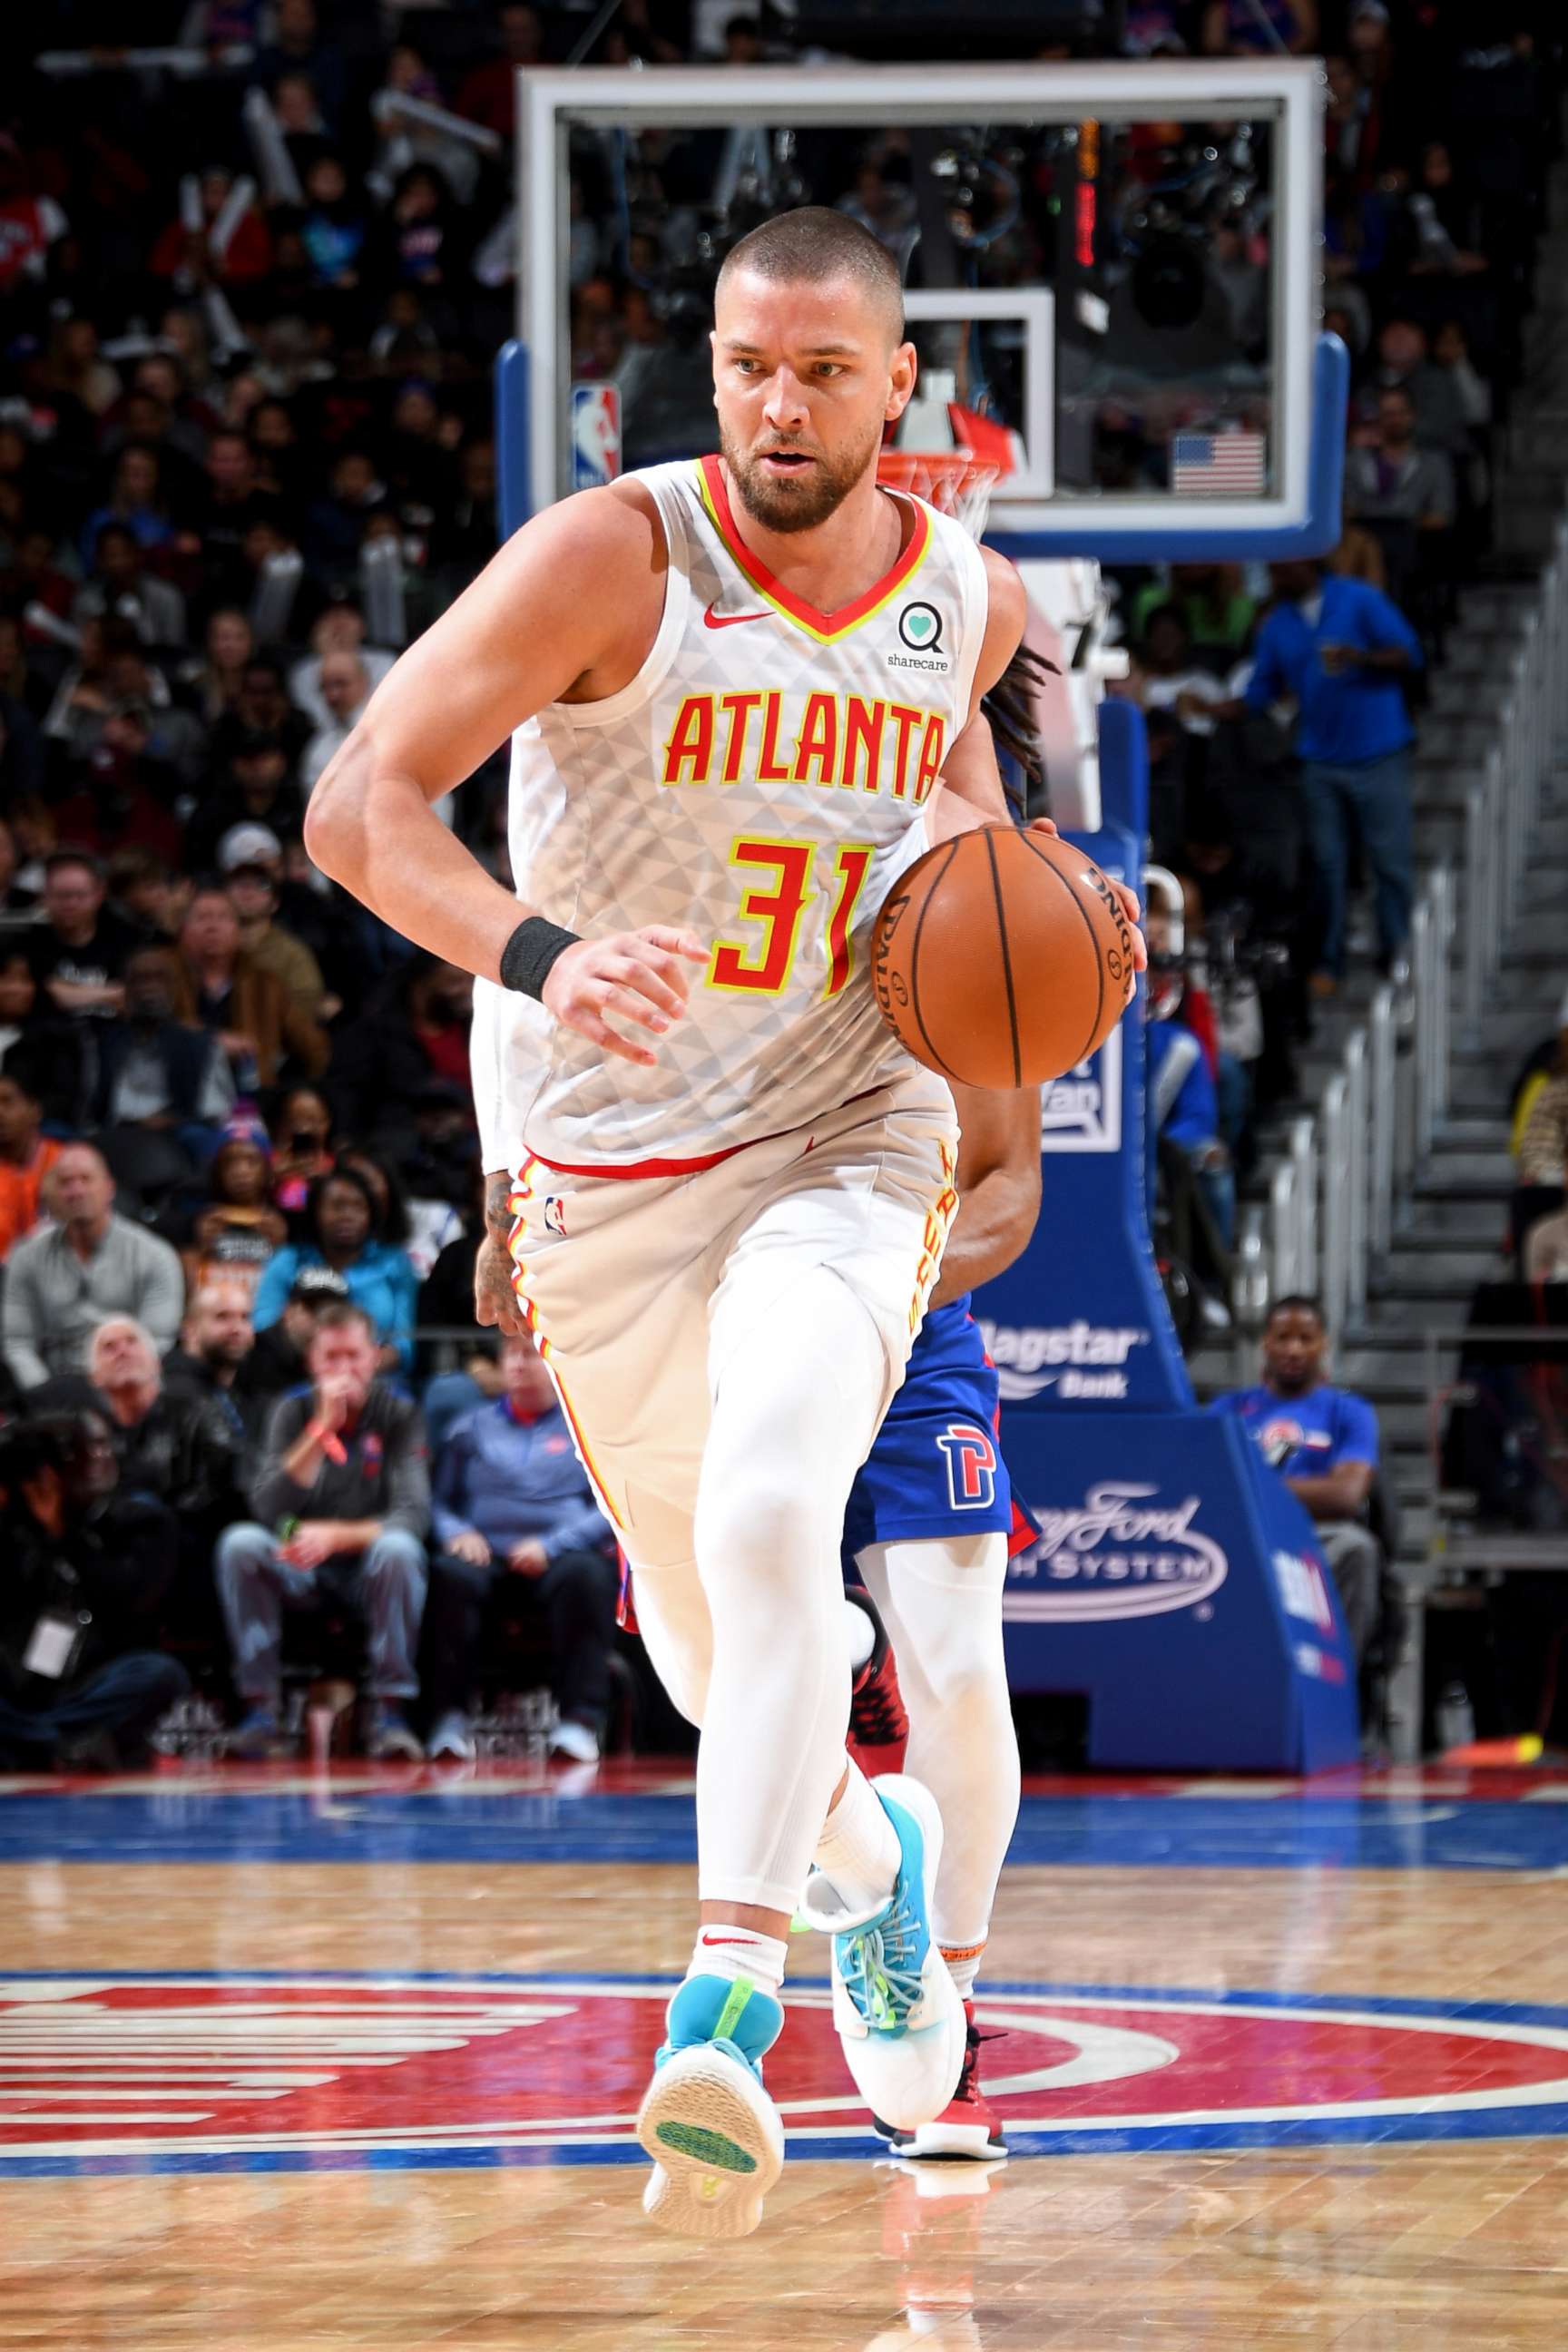 PHOTO: Chandler Parsons, #31 of the Atlanta Hawks, drives to the basket against the Detroit Pistons, Nov. 22, 2019, at Little Caesars Arena in Detroit.